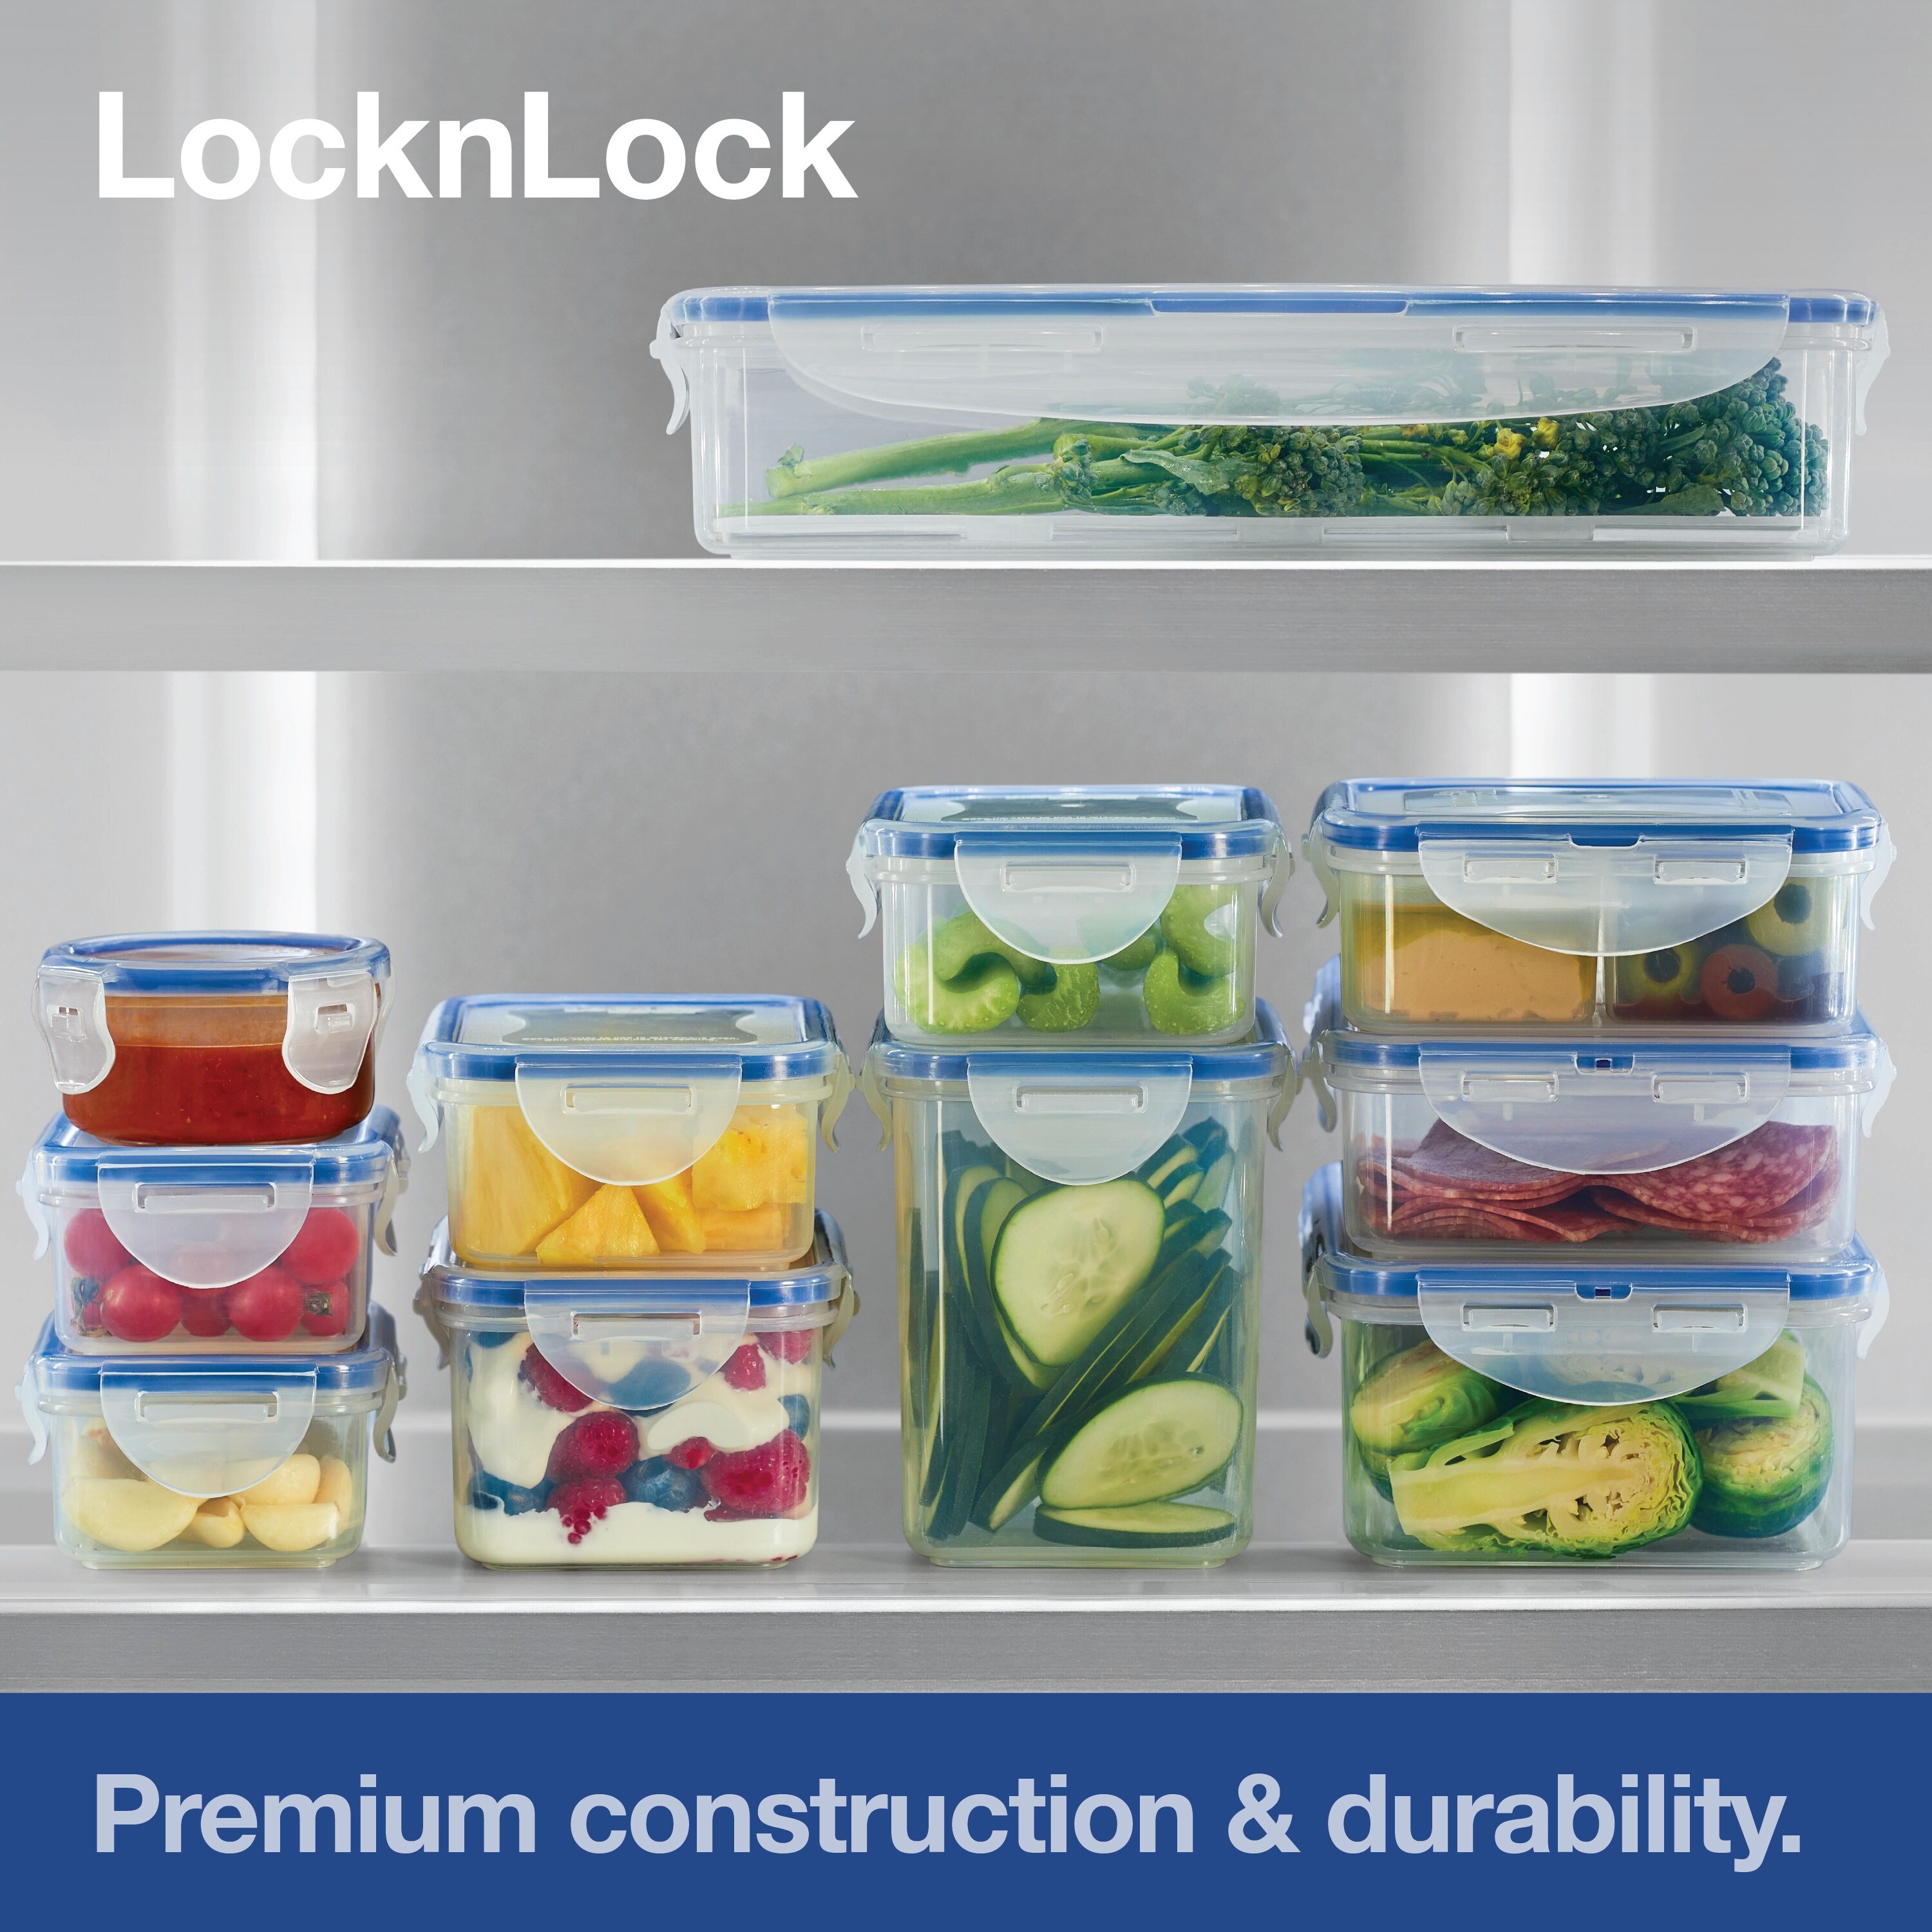 https://ak1.ostkcdn.com/images/products/is/images/direct/cc9a09cce52634cb121fed0fda6bb9151592a1d3/LocknLock-Storage-Food-Storage-Container-Set%2C-24-Piece%2C-Clear.jpg